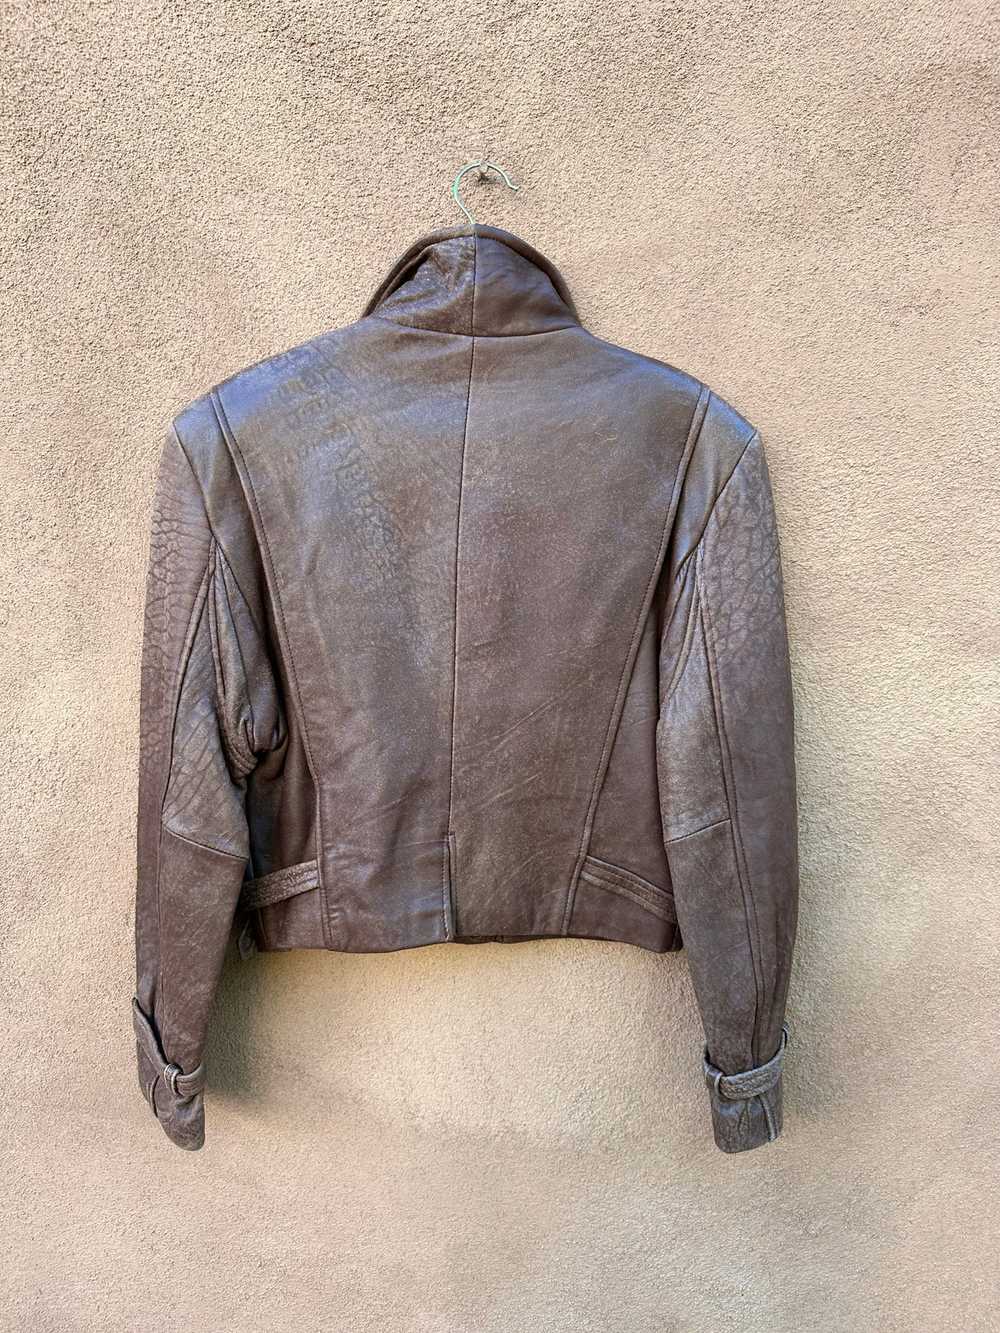 San Diego Leather Jacket Factory - Made in USA - image 2